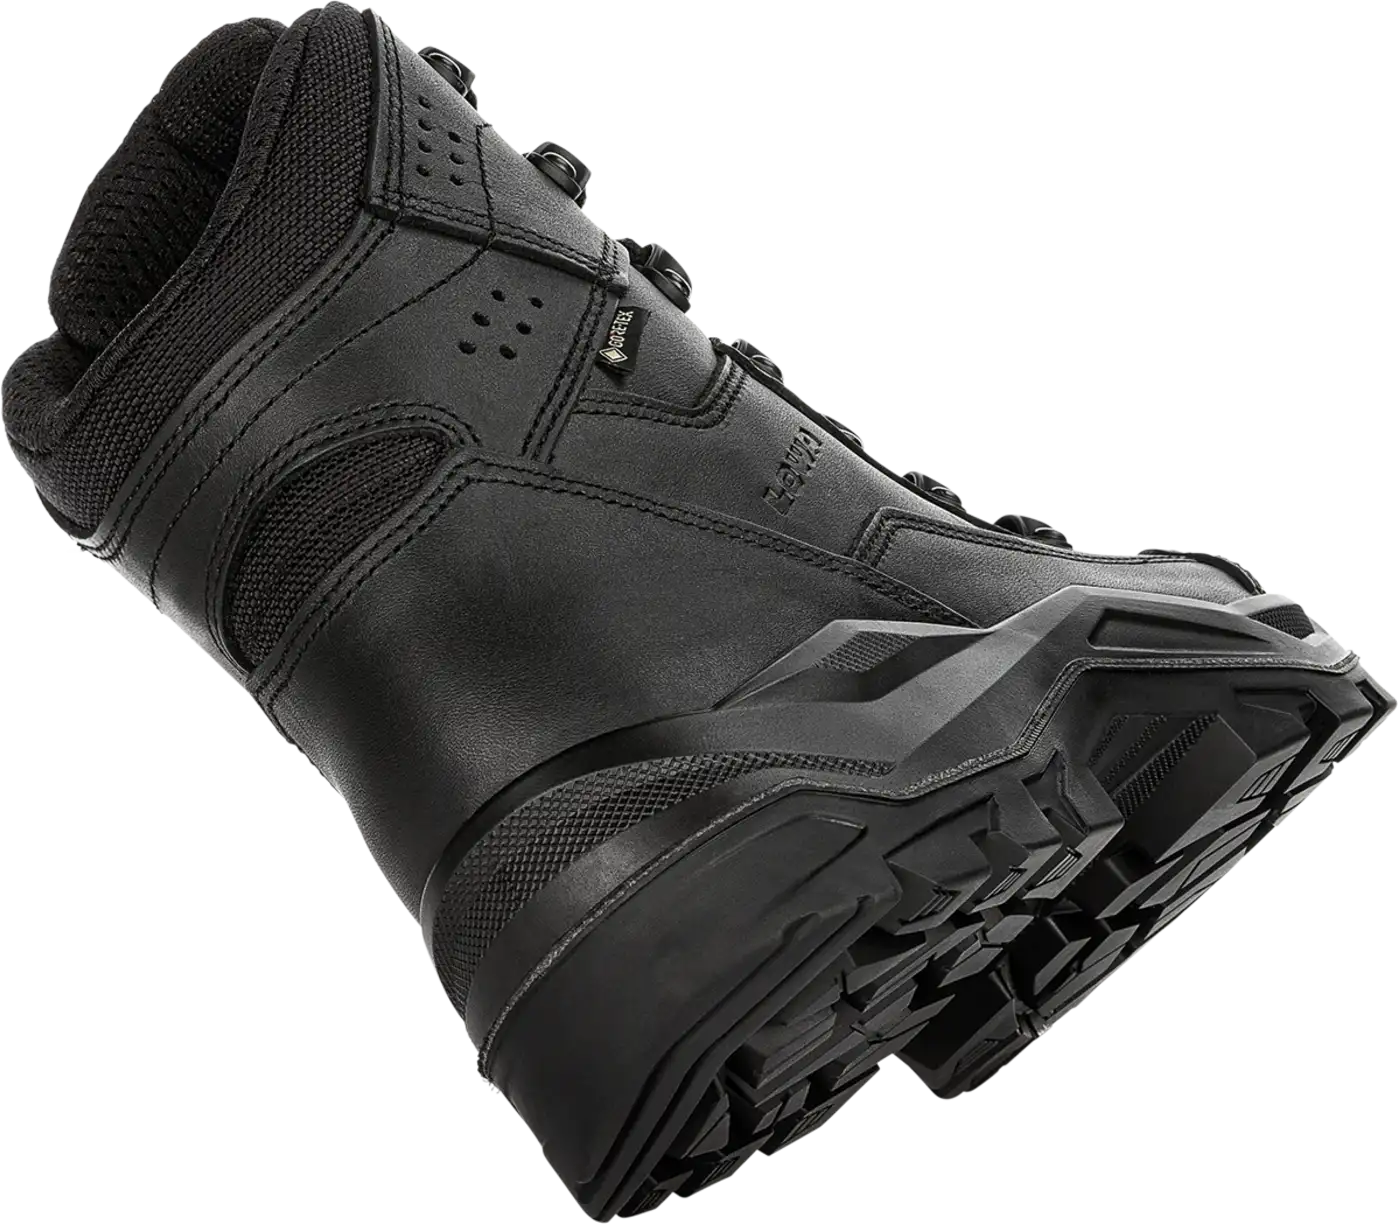 RENEGADE II GTX MID TF mid-cut protective shoes - "500617"